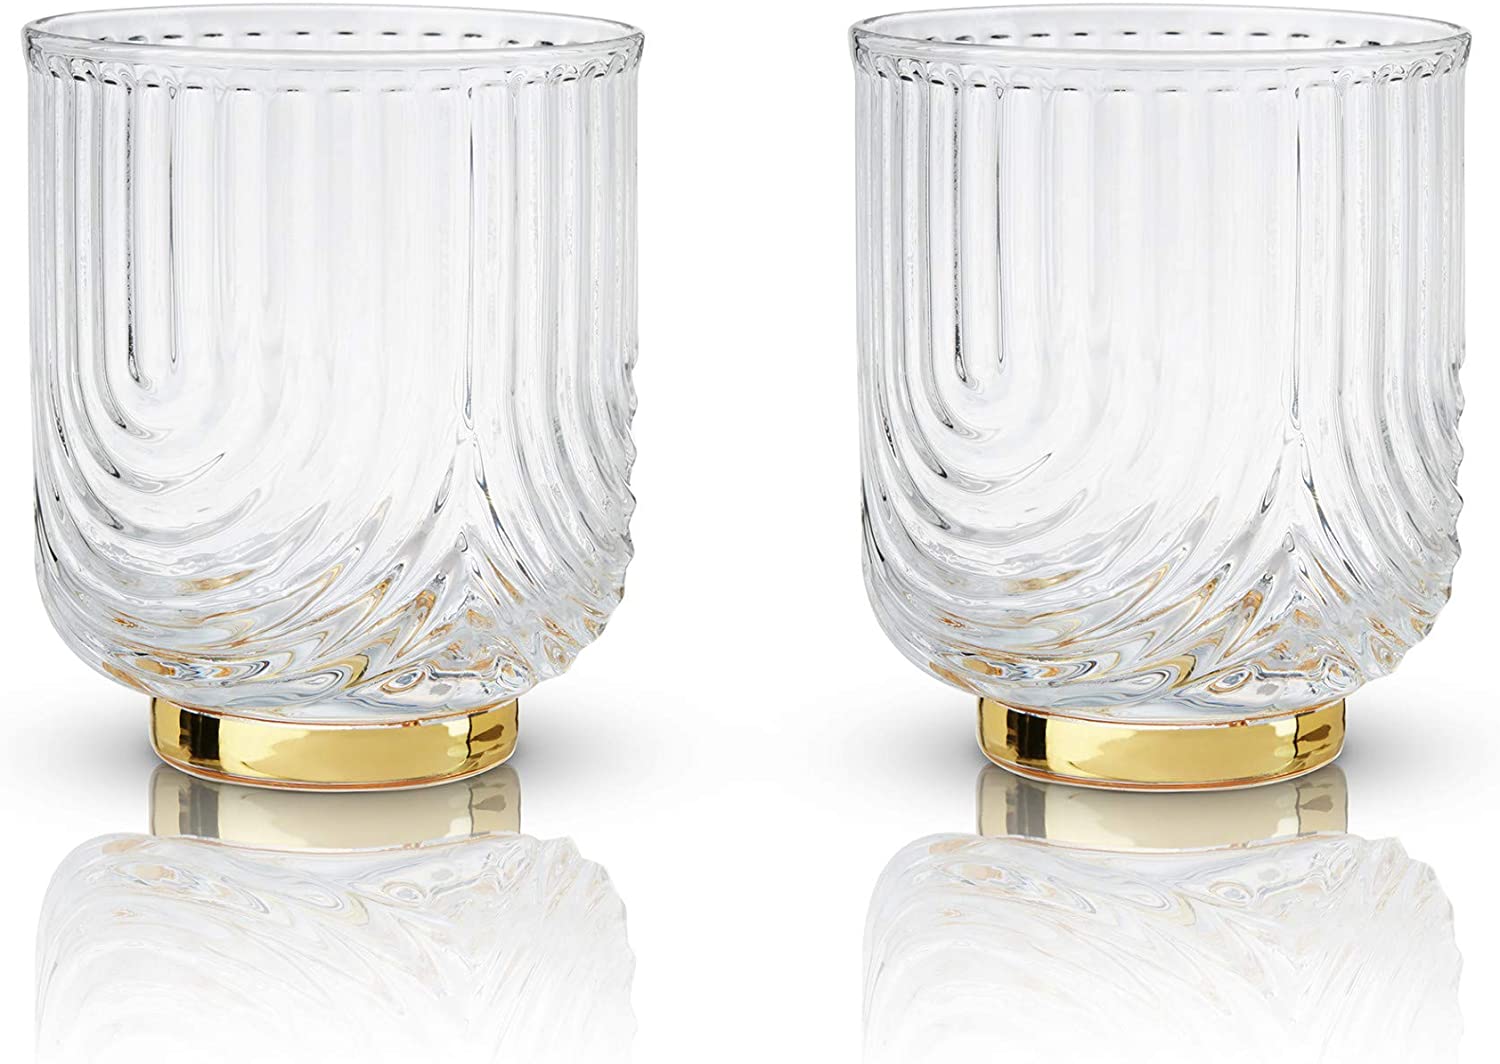 12 ounces Double Old Fashioned Glass Gold Plated Base Bar Glasses Set of 2 Crystal Glassware